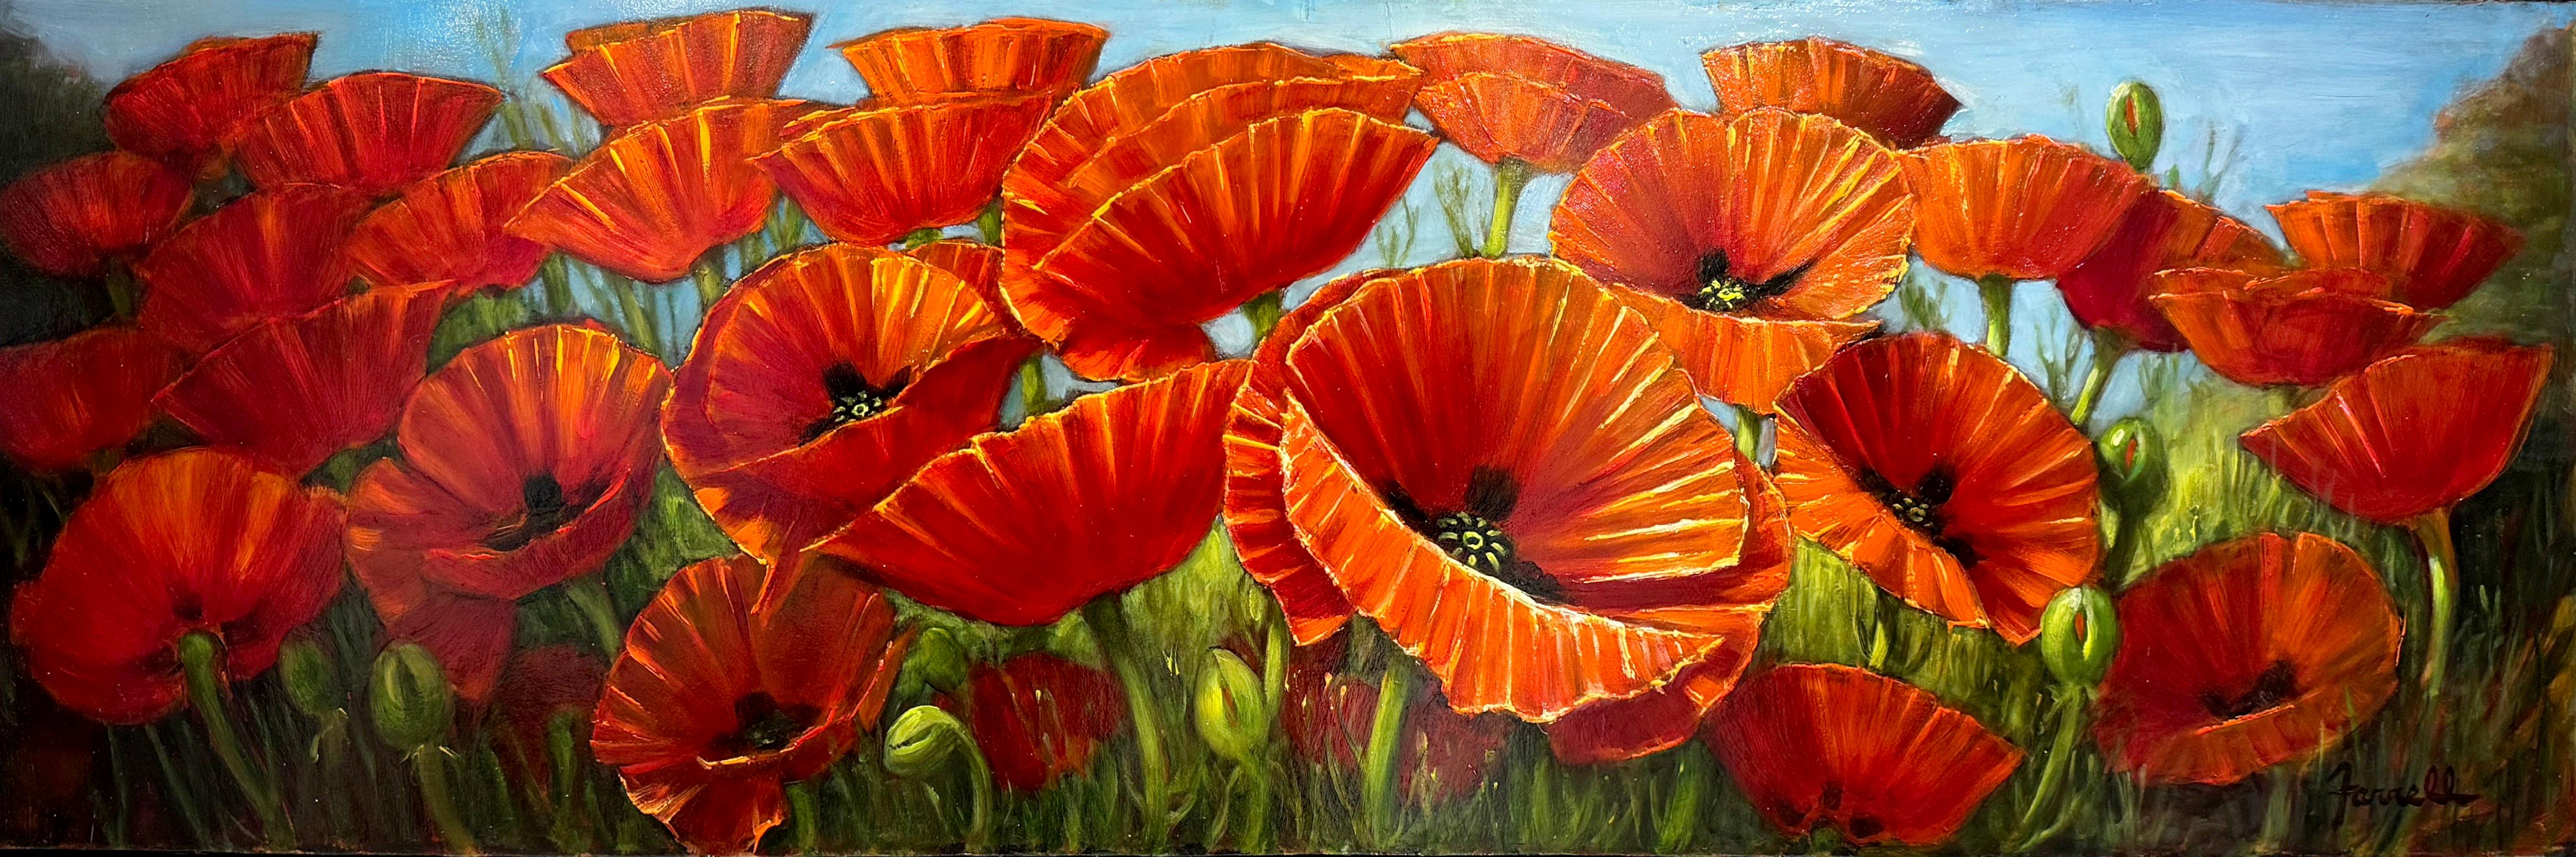 "Red Poppies in Tuscany", is a 12x36 oil painting on board by artist Sean Farrell featuring a field of red aromatic poppy flowers against a blue sky background. Clusters of blossomed red poppies breathe life and energy into this lush garden. Strong